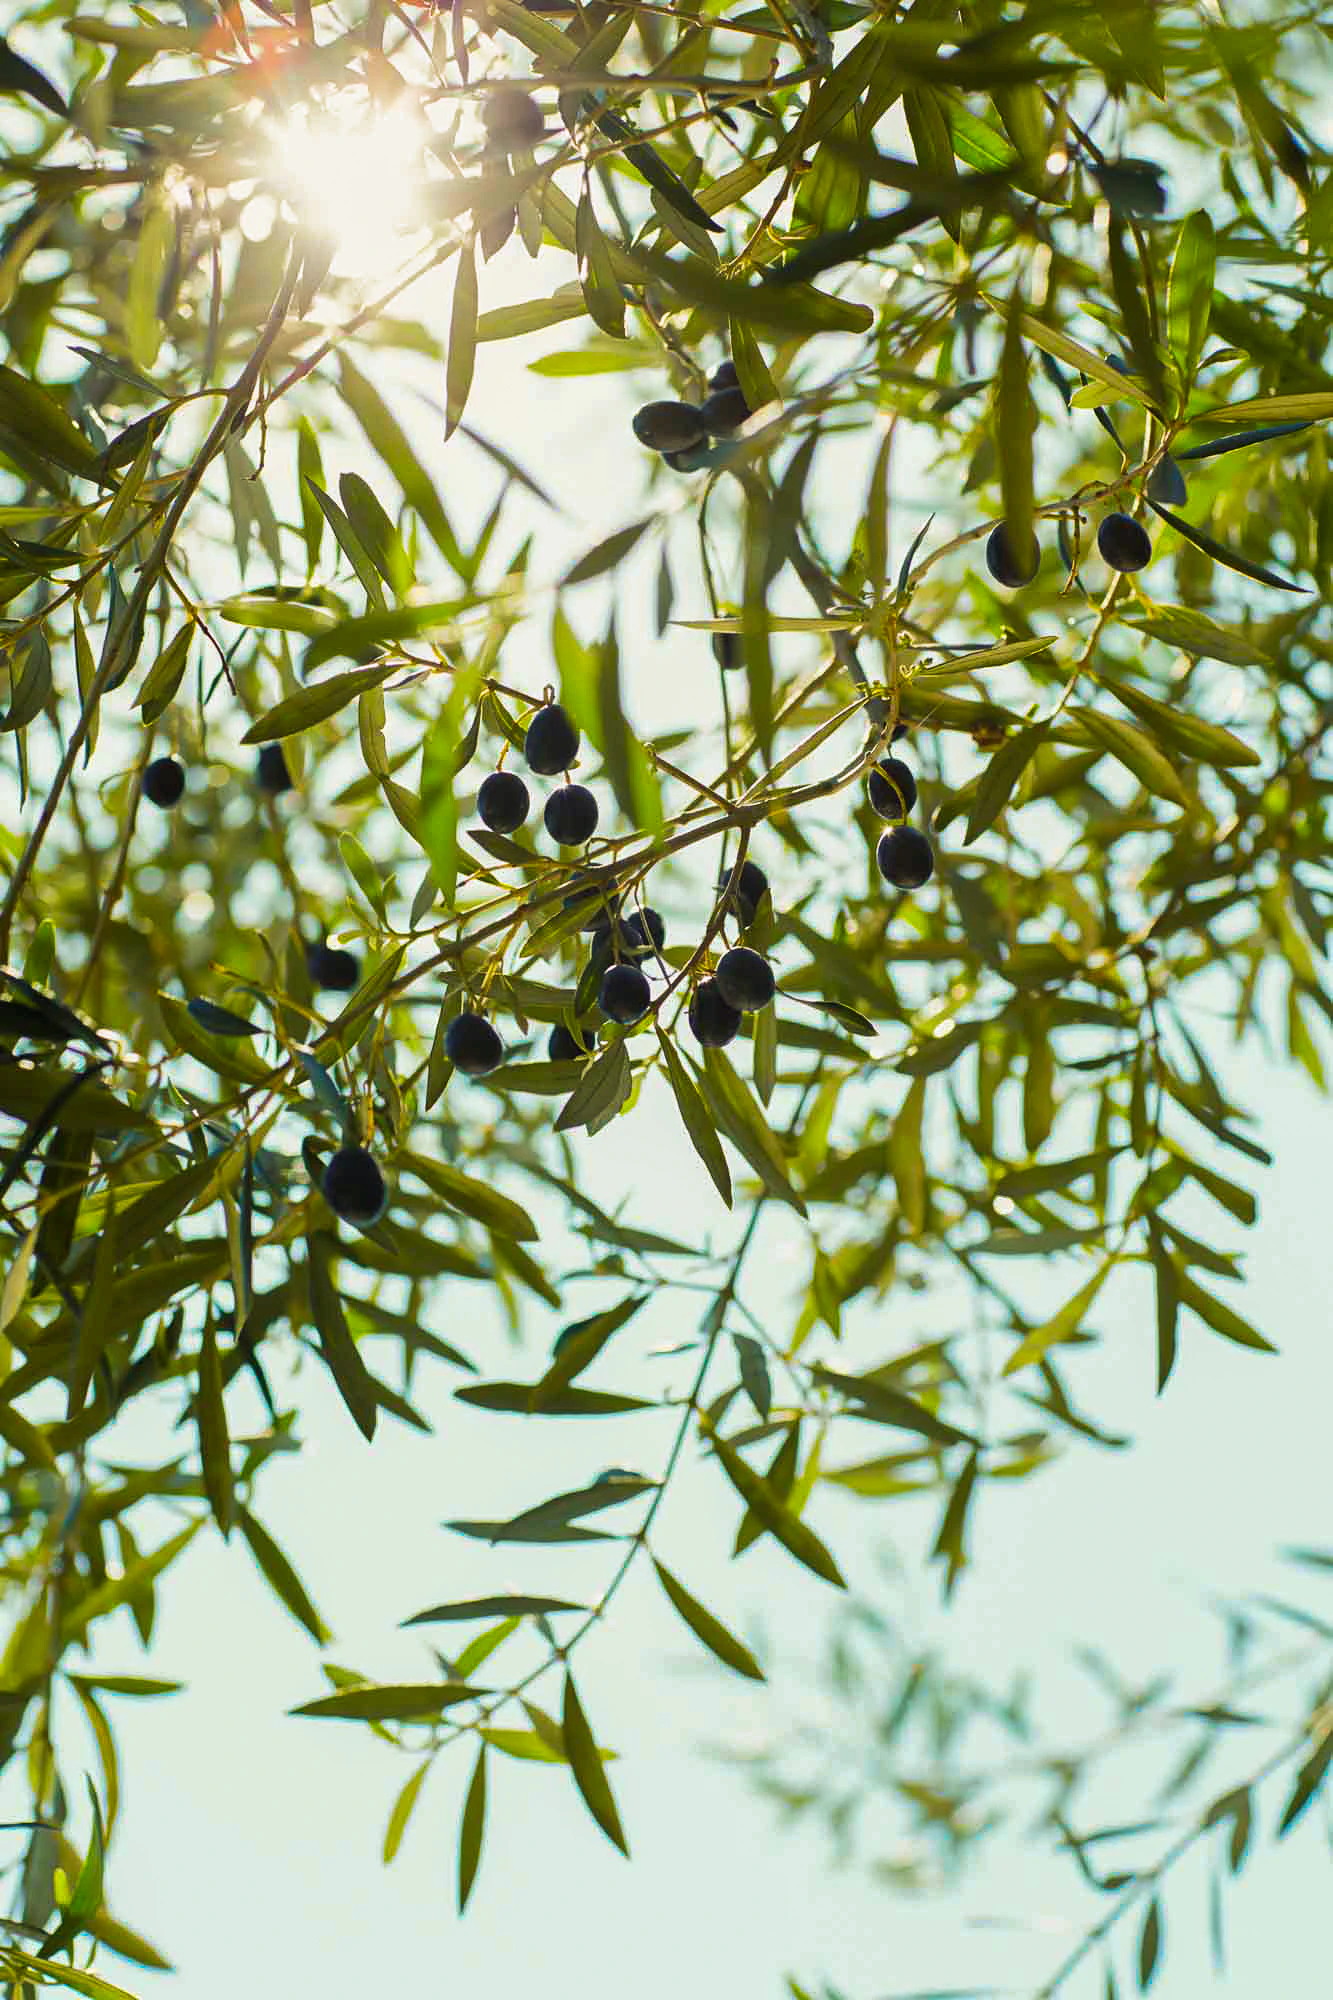 Black olives growing on a tree.